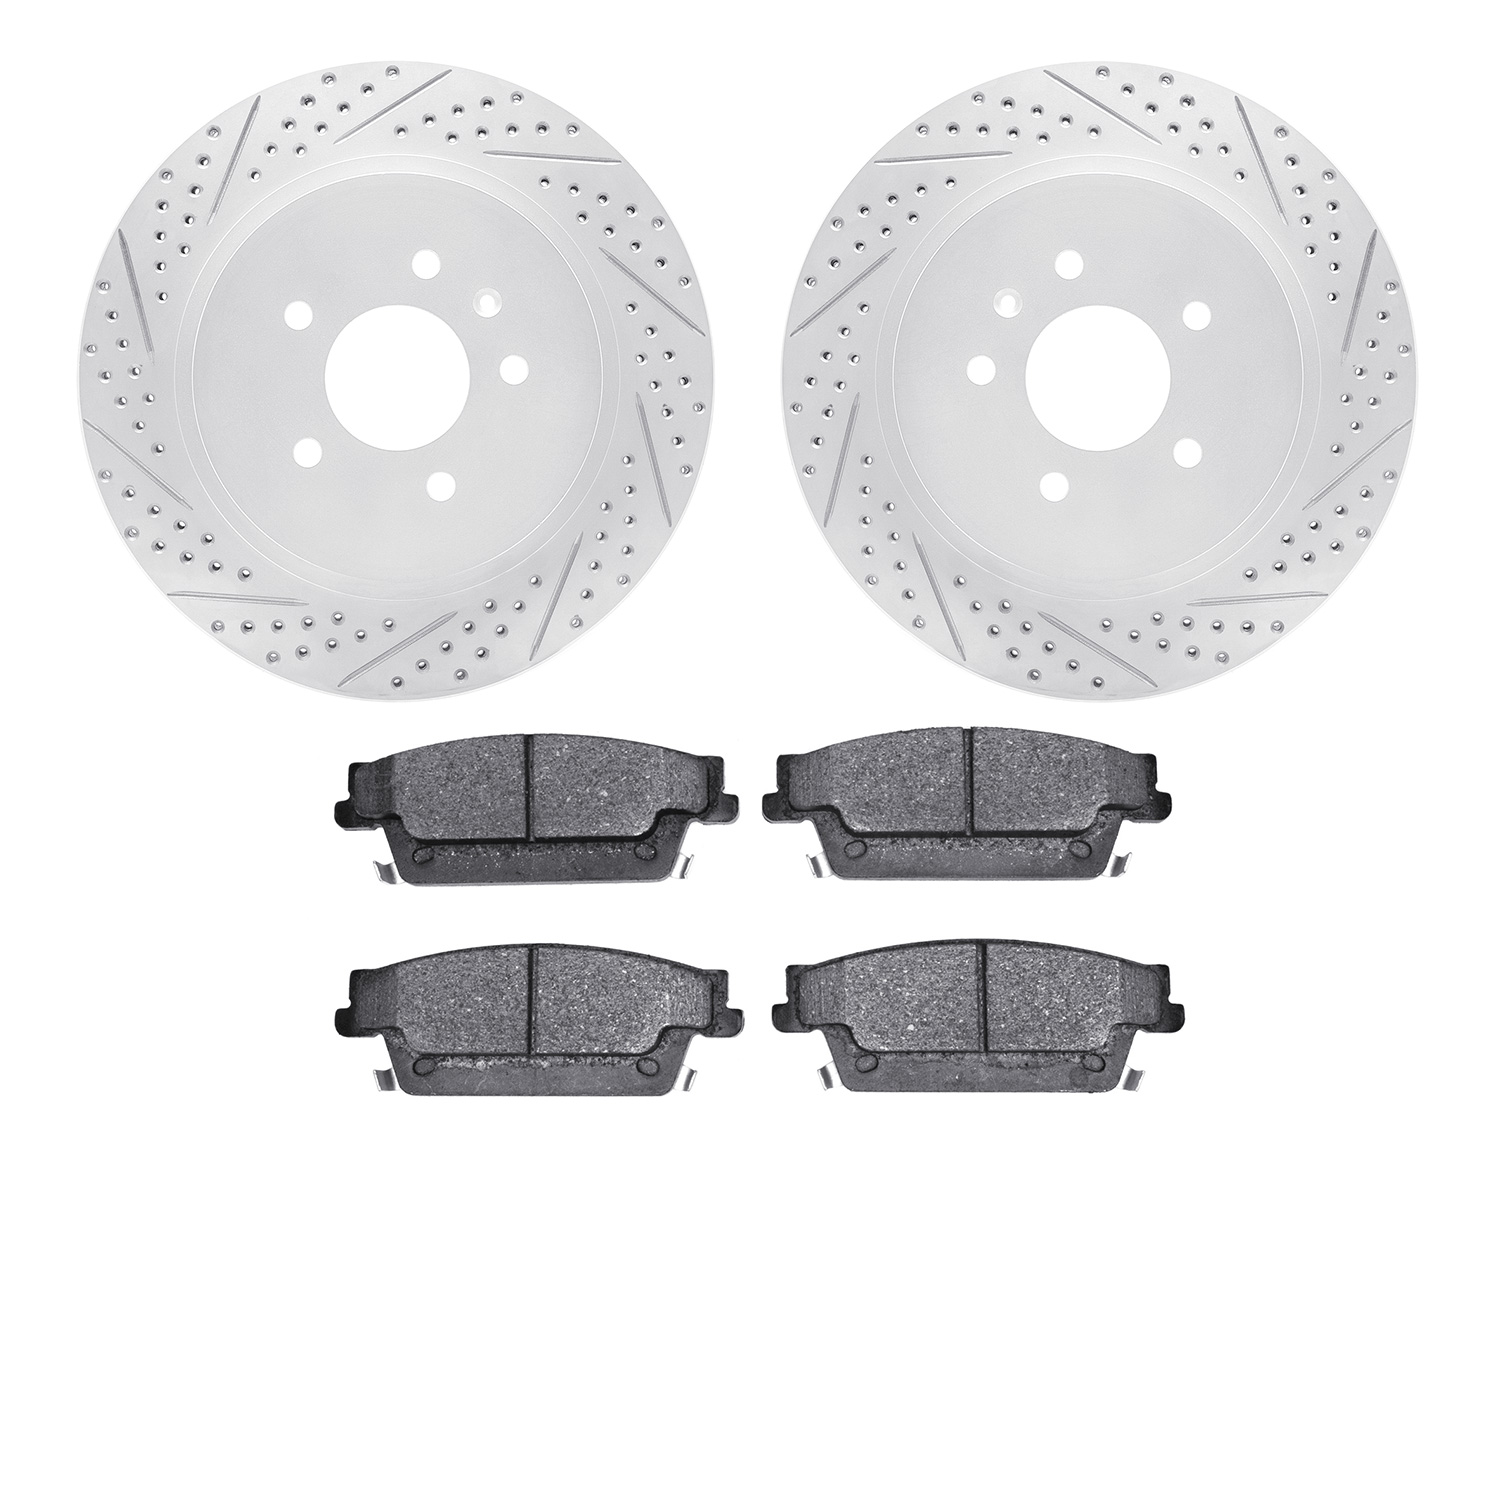 2502-46019 Geoperformance Drilled/Slotted Rotors w/5000 Advanced Brake Pads Kit, 2005-2011 GM, Position: Rear